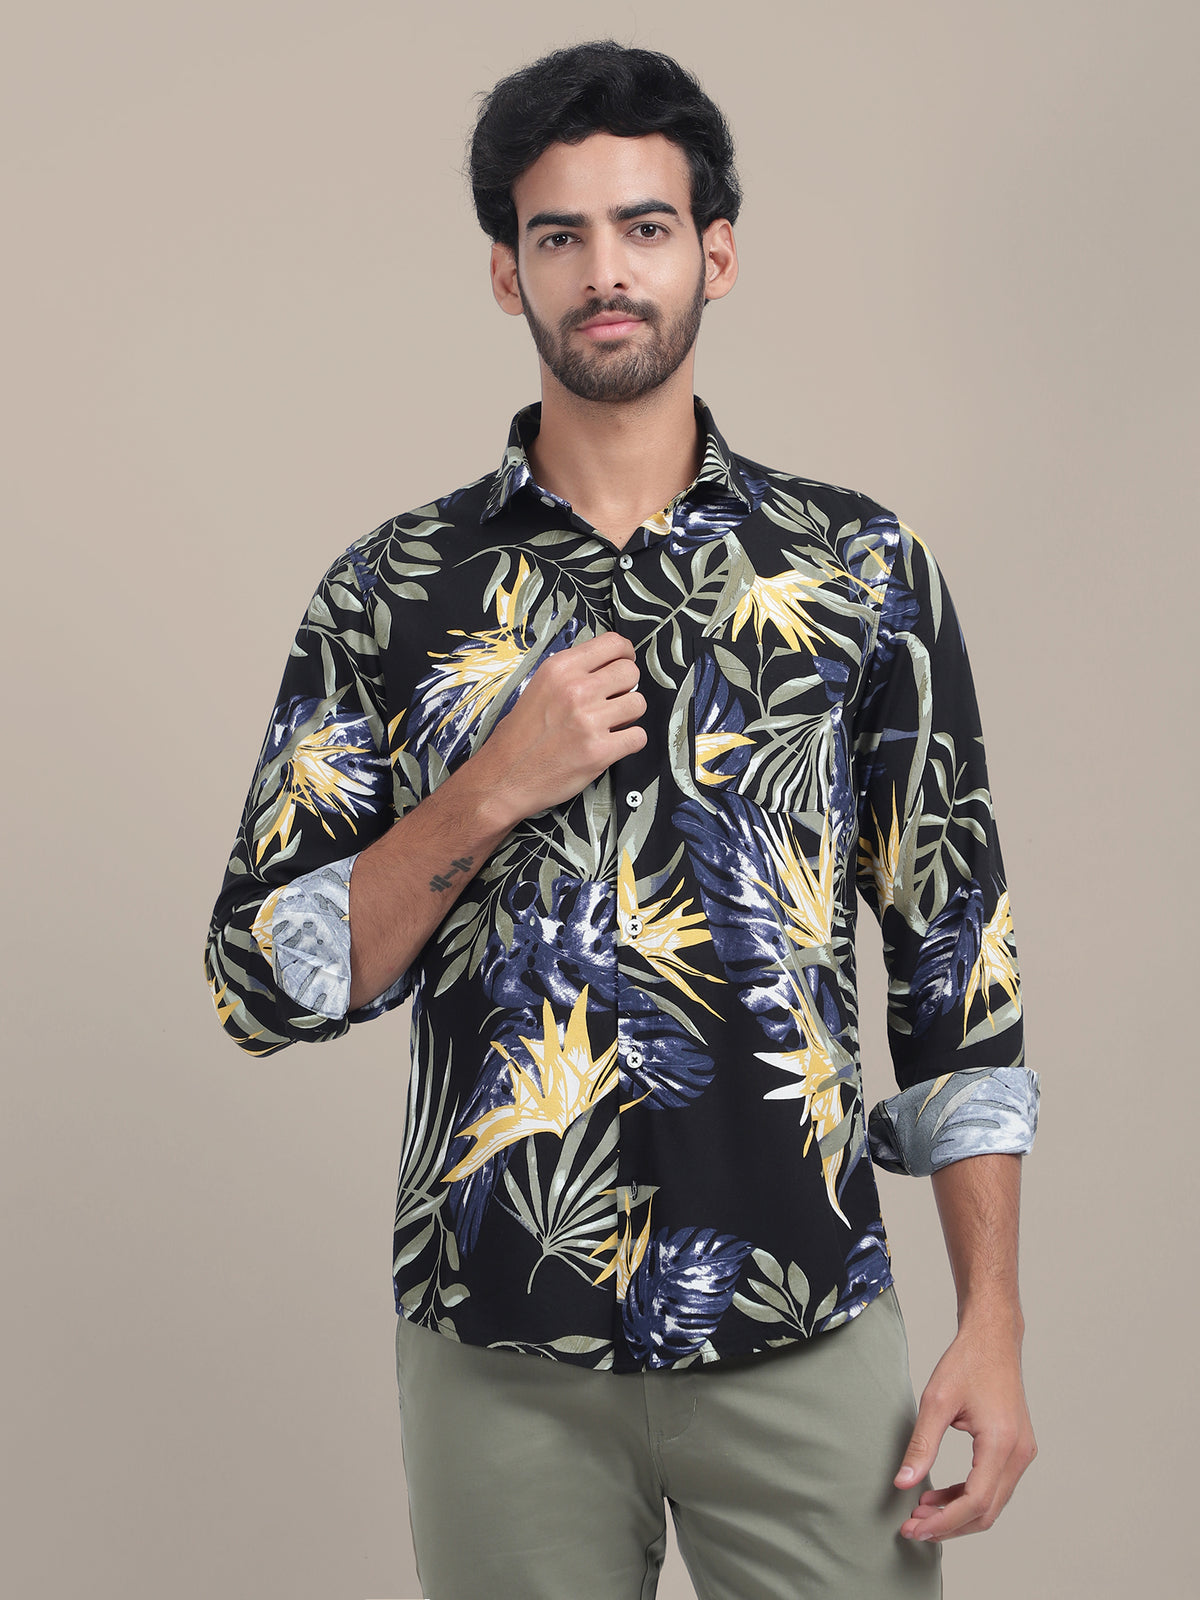 AMSWAN MEN'S PREMIUM RAYON SHIRT WITH JUNGLE PRINT IN FULL SLEEVE AND BLACK COLOR